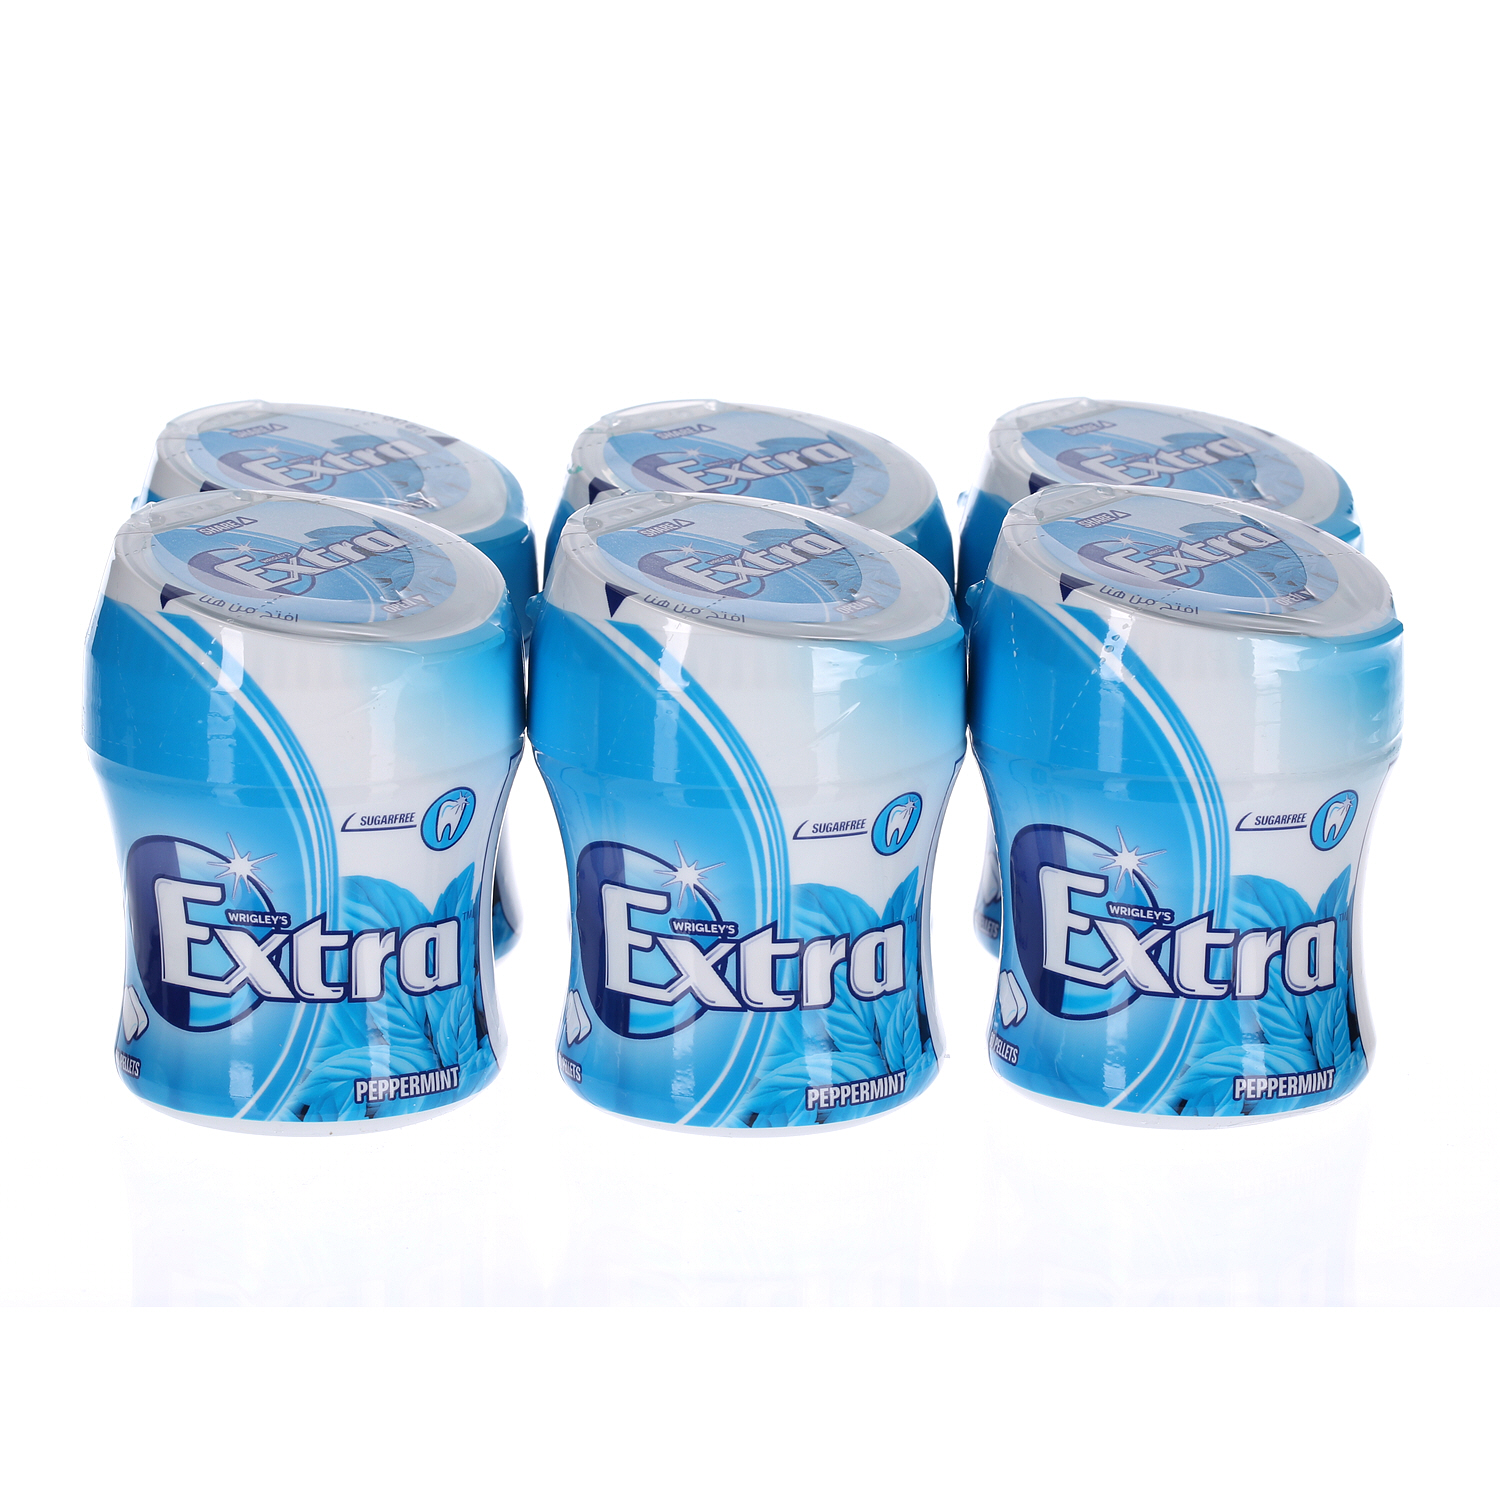 Wrigley's Extra Biggie Peppermint Chewing Gum 84gm × 6'S